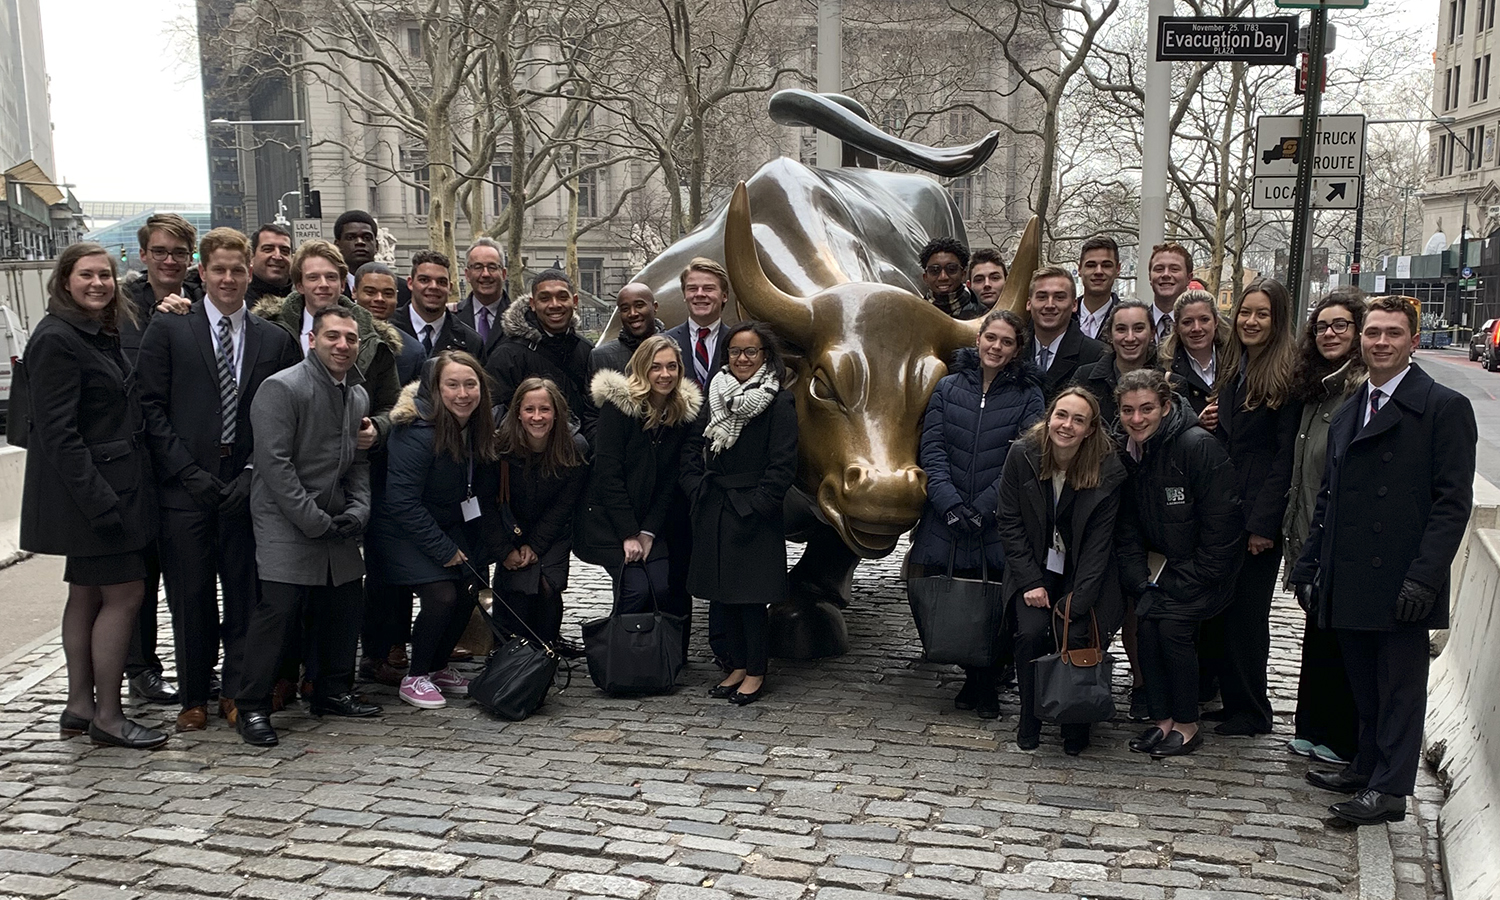 Students gather around the bull statue on Wall Street